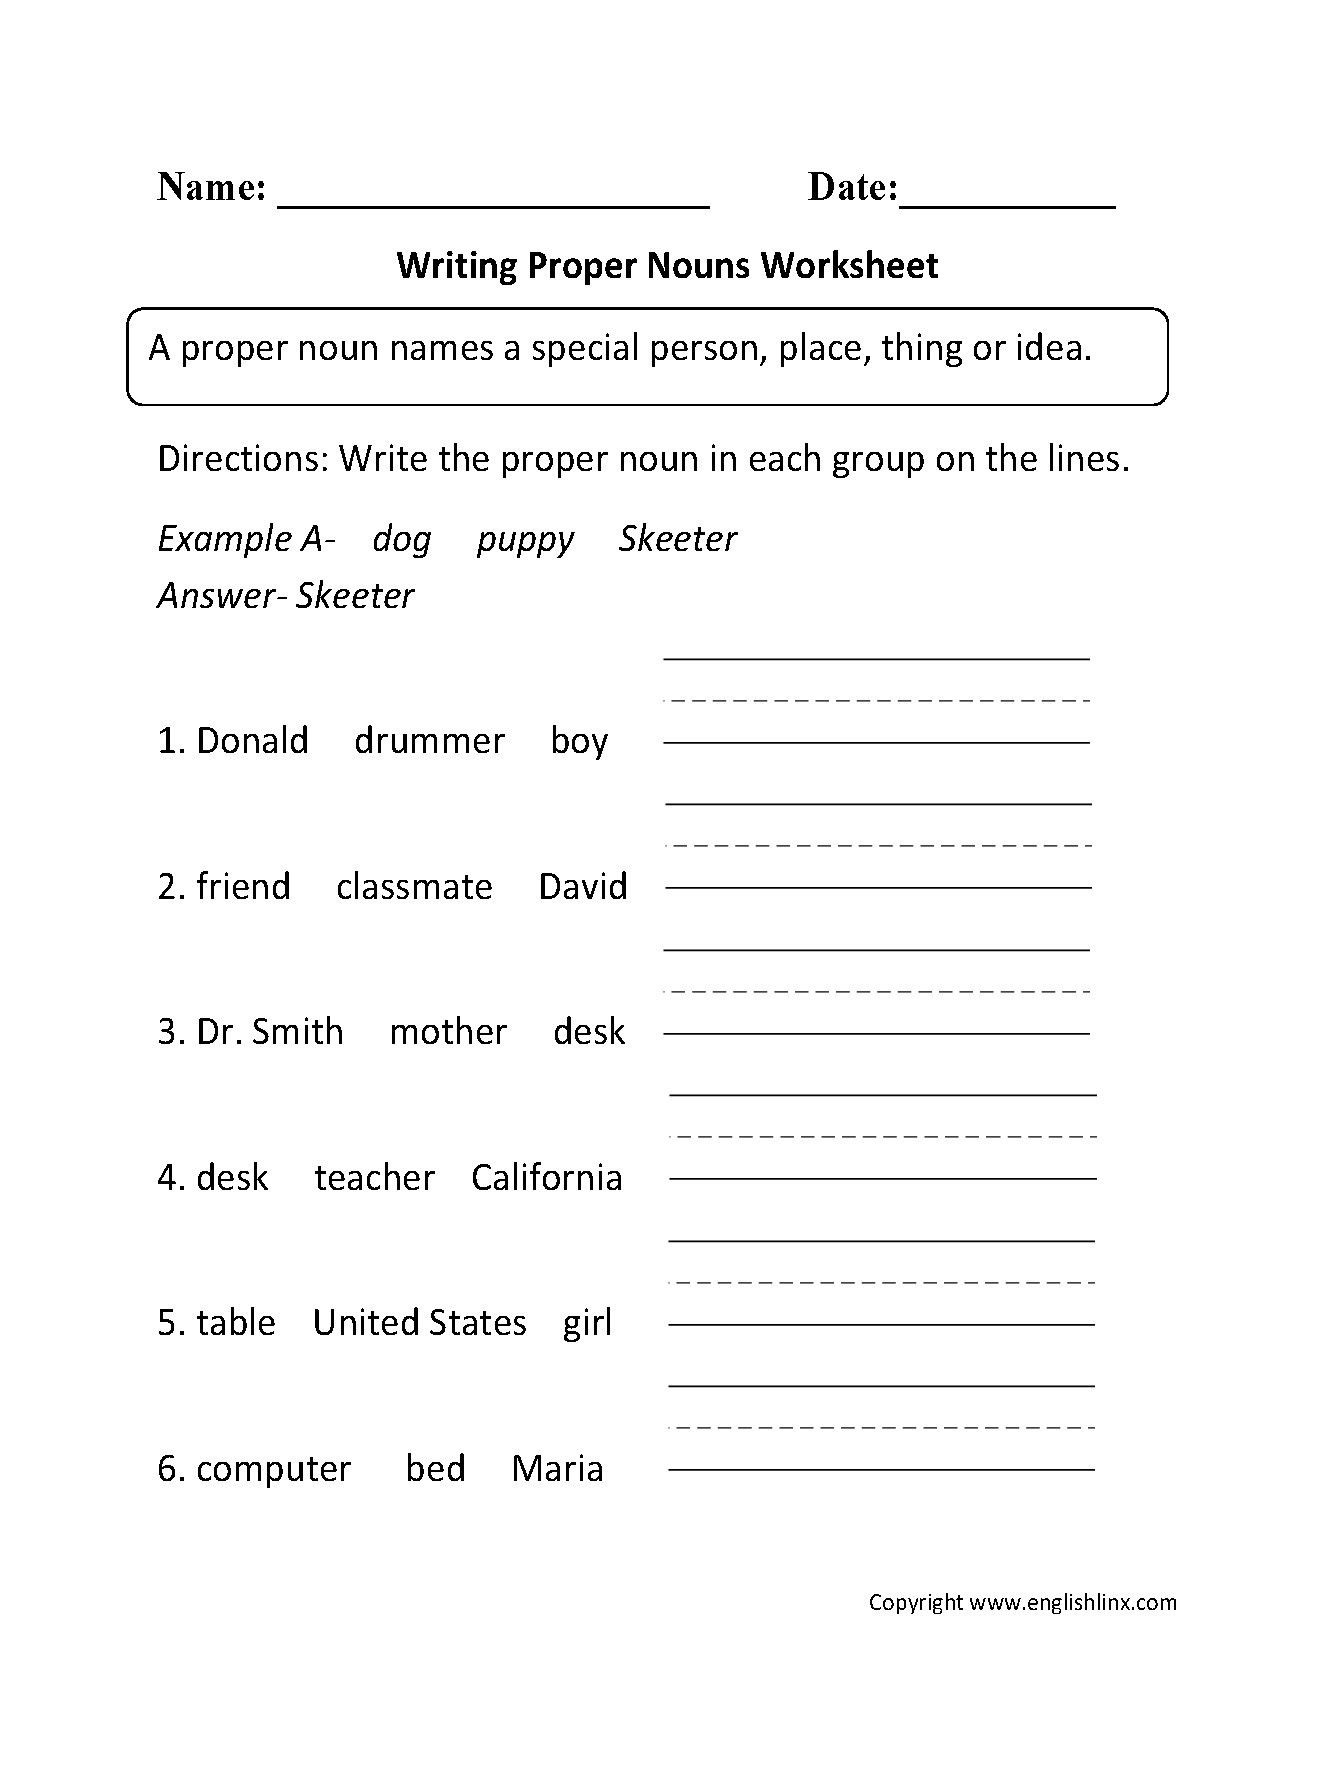 fun-summer-worksheets-for-4th-grade-db-excelcom-narrative-writing-example-3rd4th-grades-great